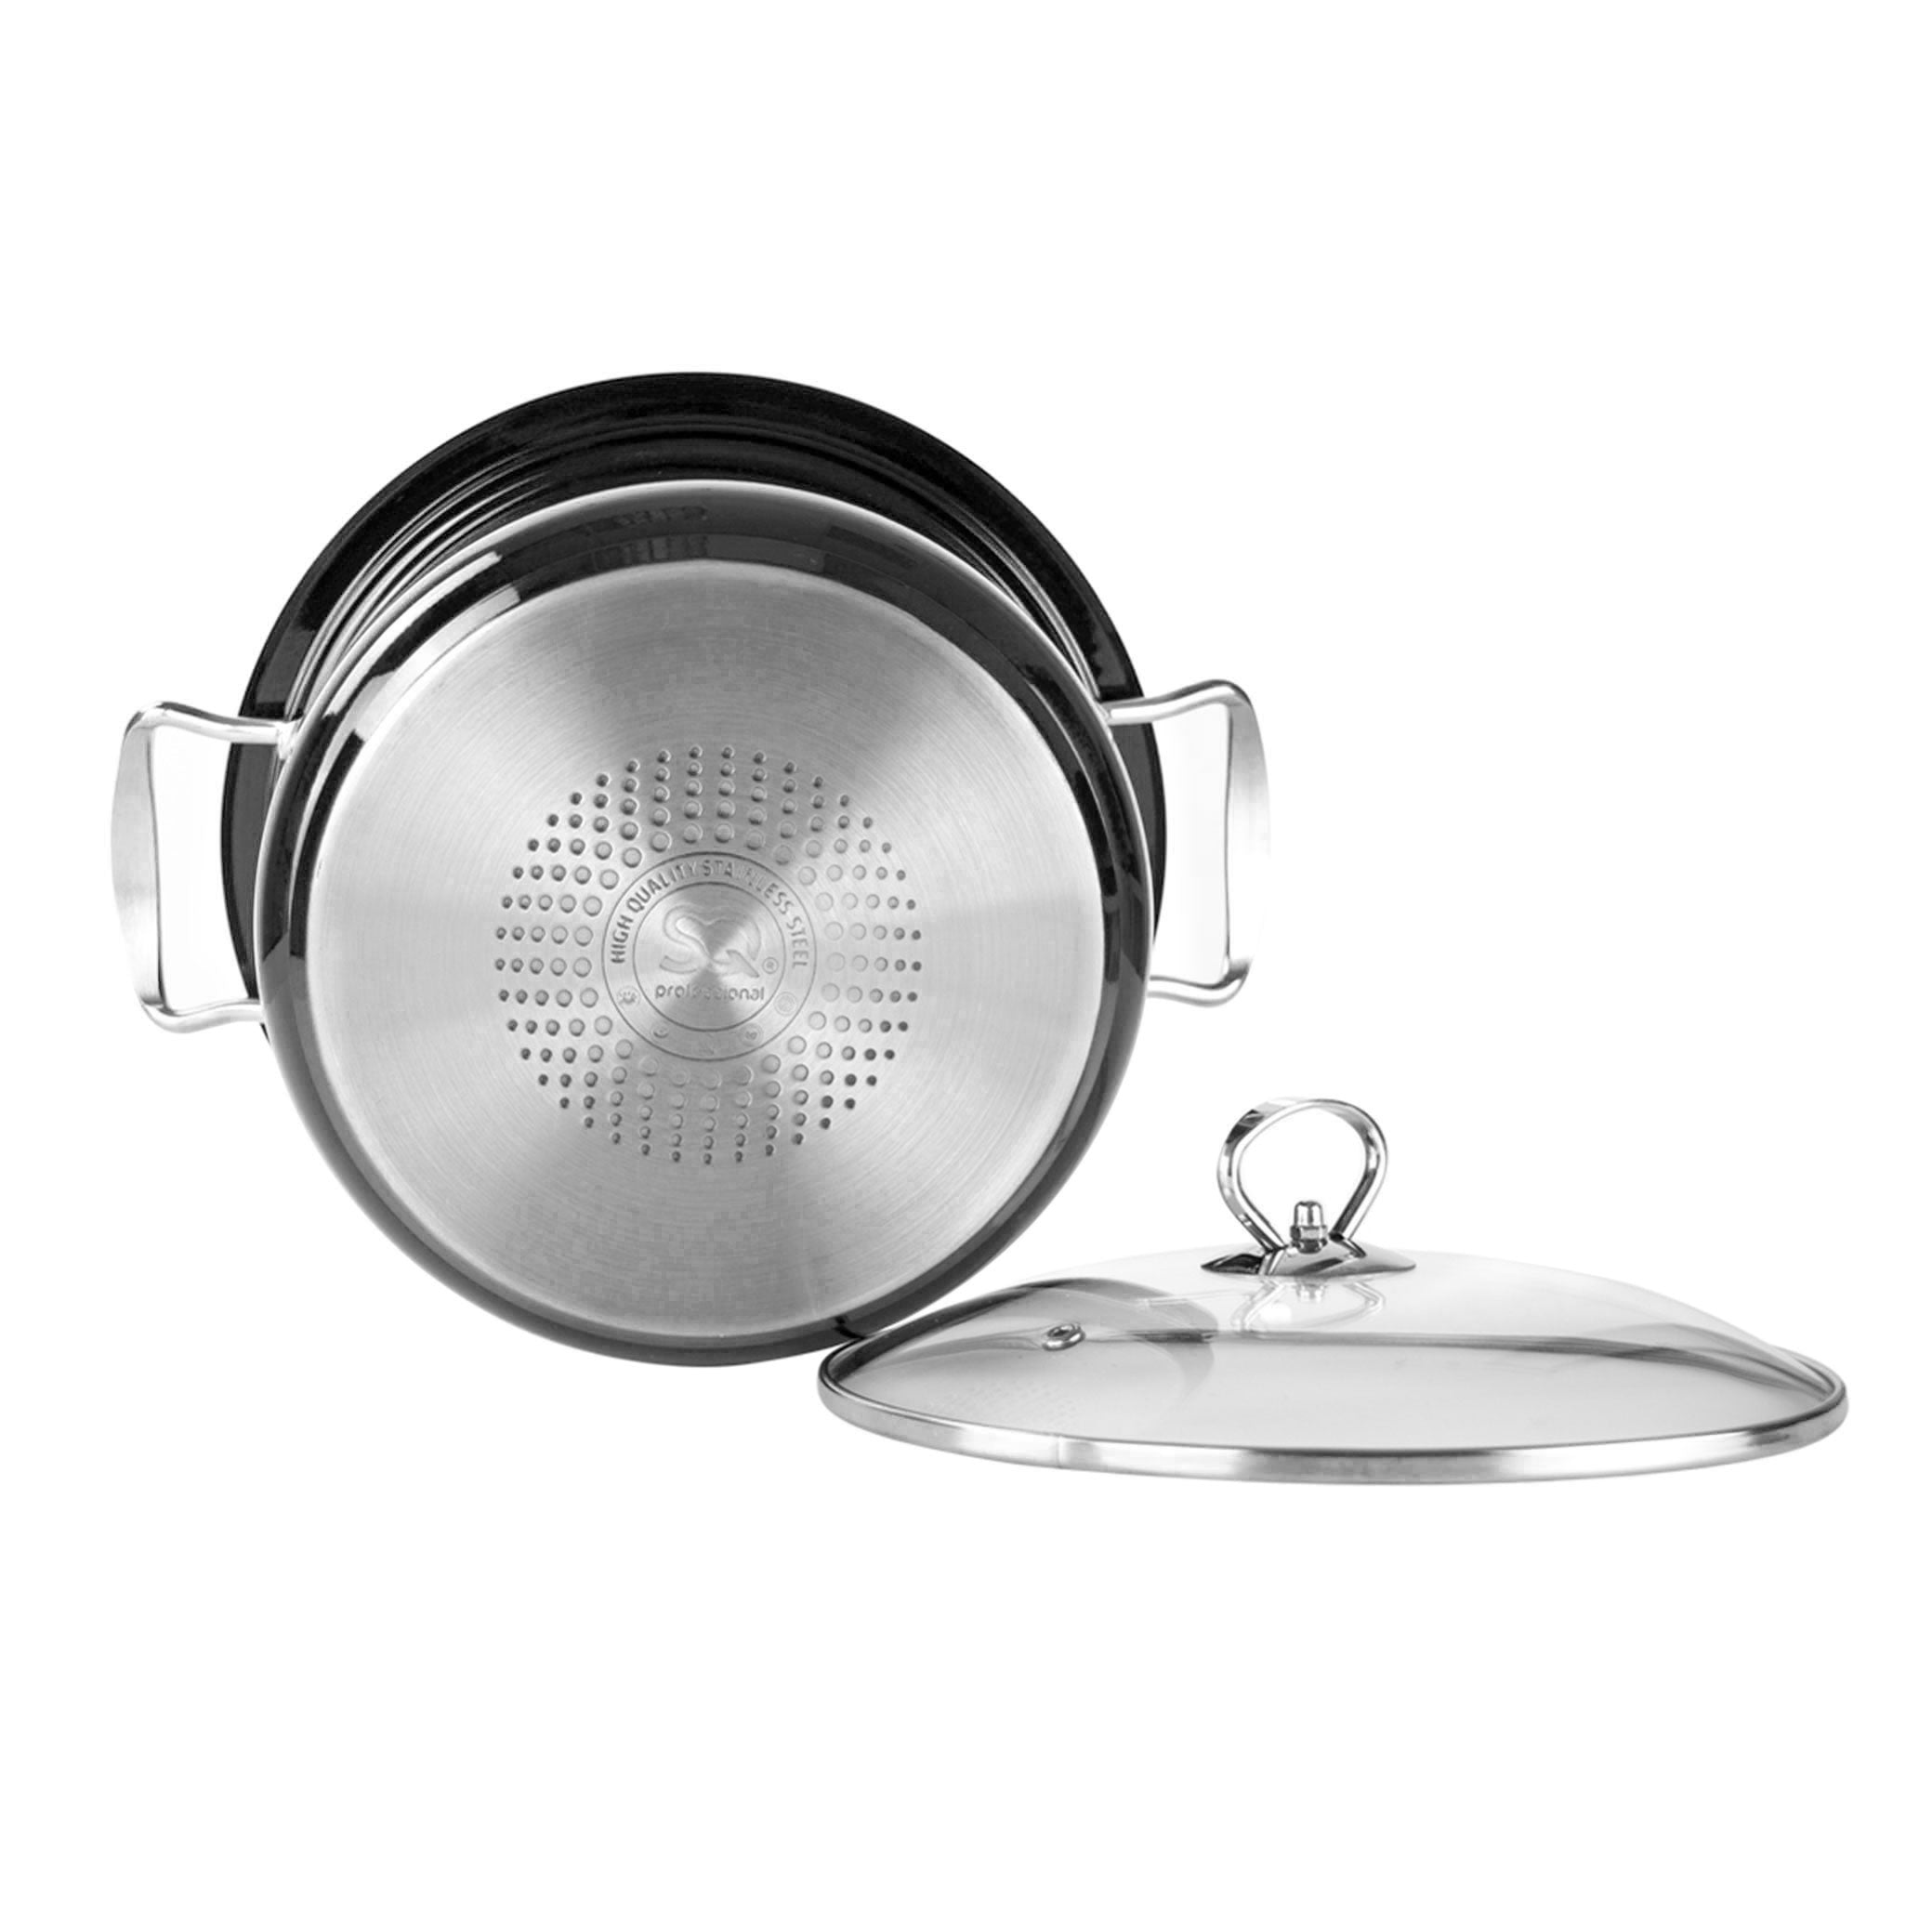 Stainless Steel Stockpot - Induction Base - ONYX - 26cm